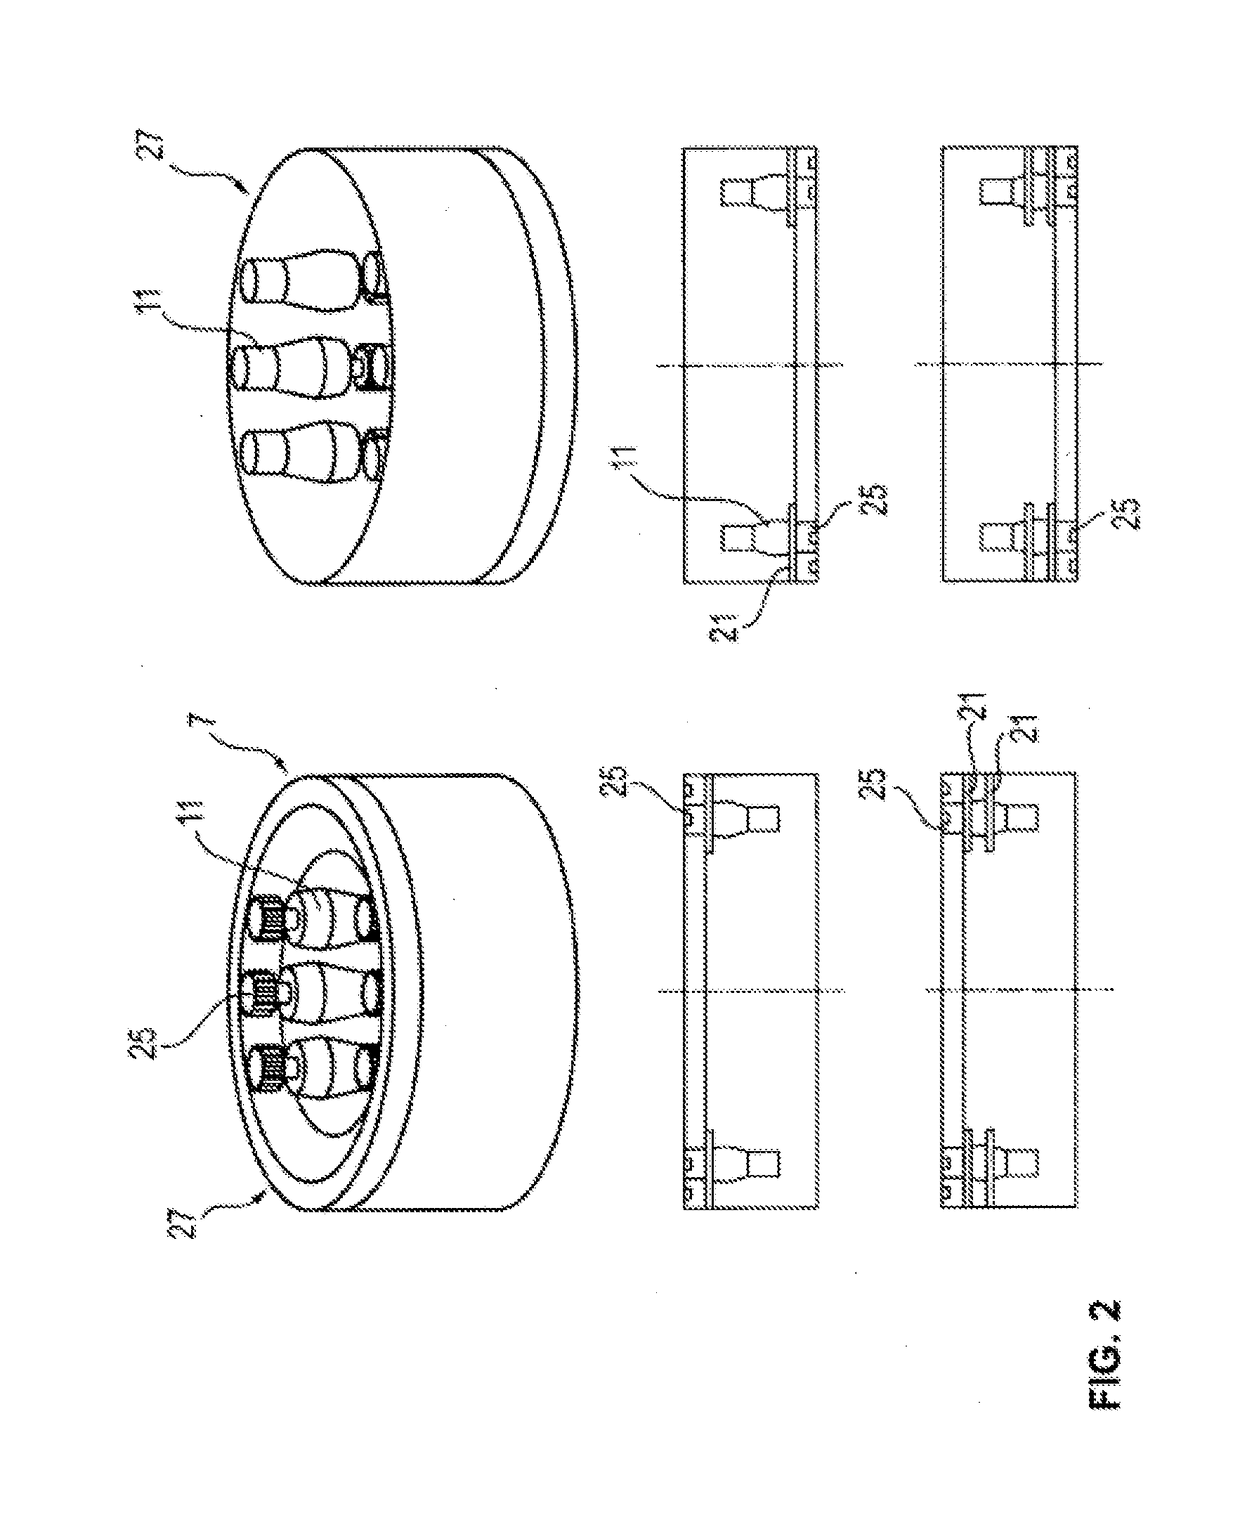 Adjustment and/or drive unit, wind power plant having such an adjustment and/or drive unit, and method for controlling such an adjustment and/or drive unit